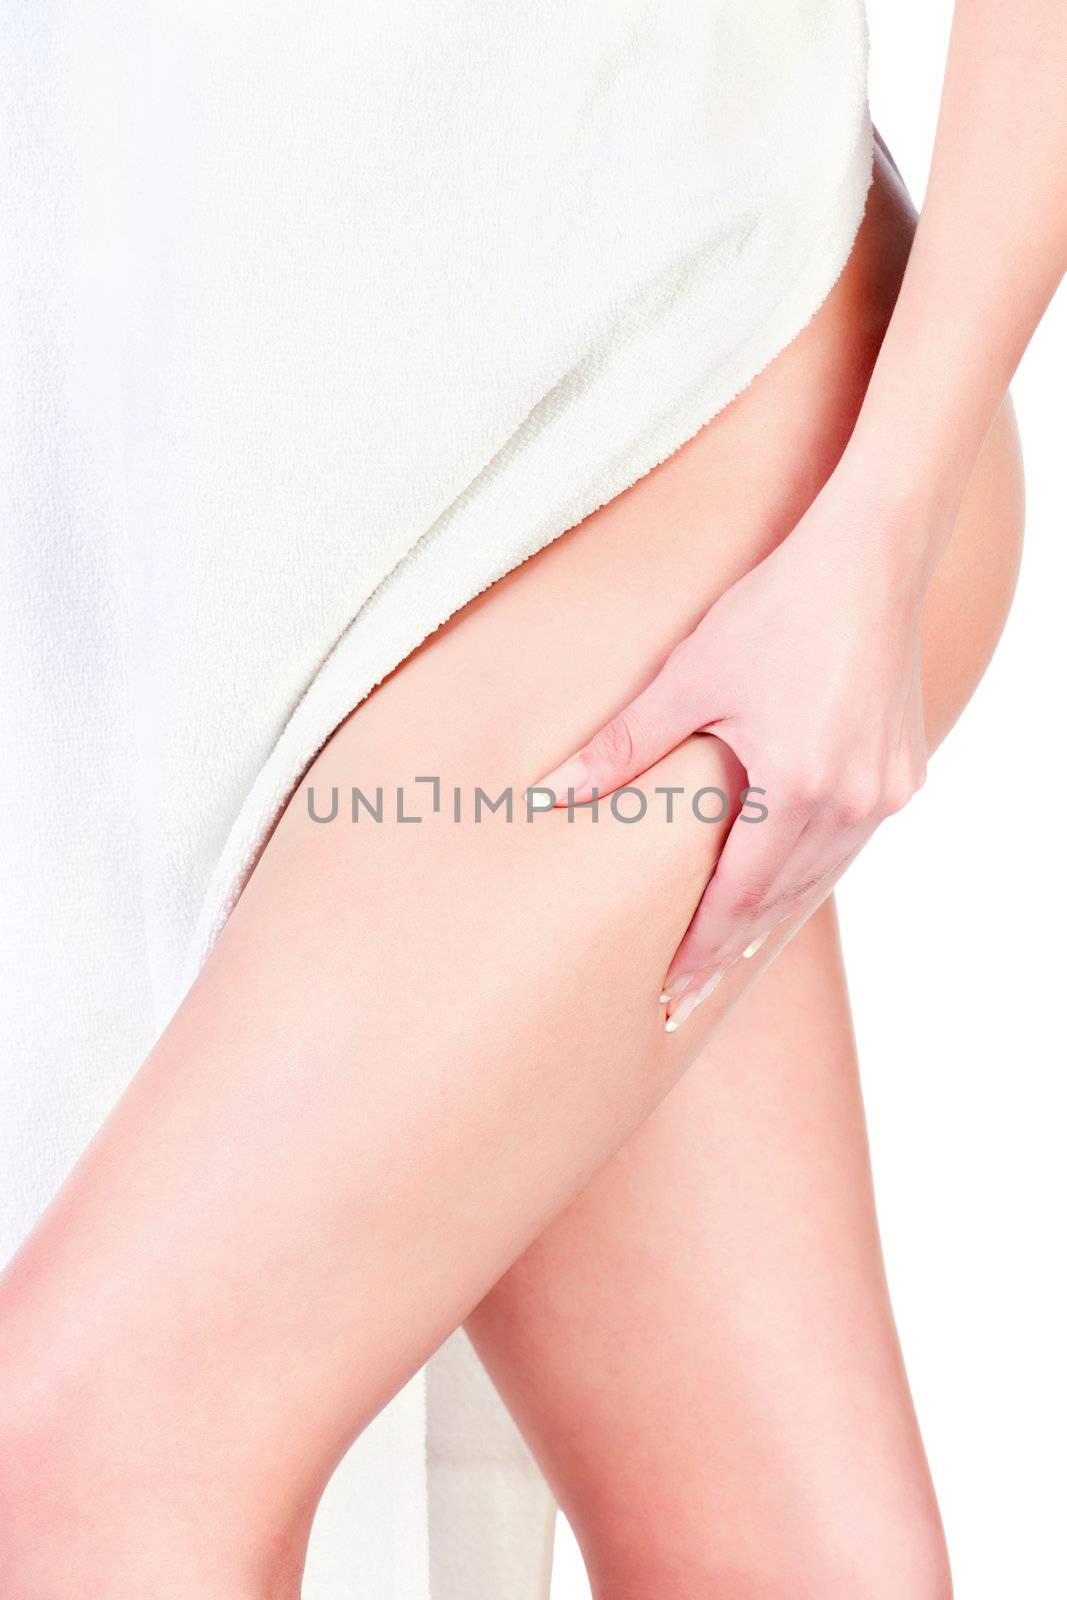 Woman with towel pinching leg for skin fold test, isolated on white. Health concept